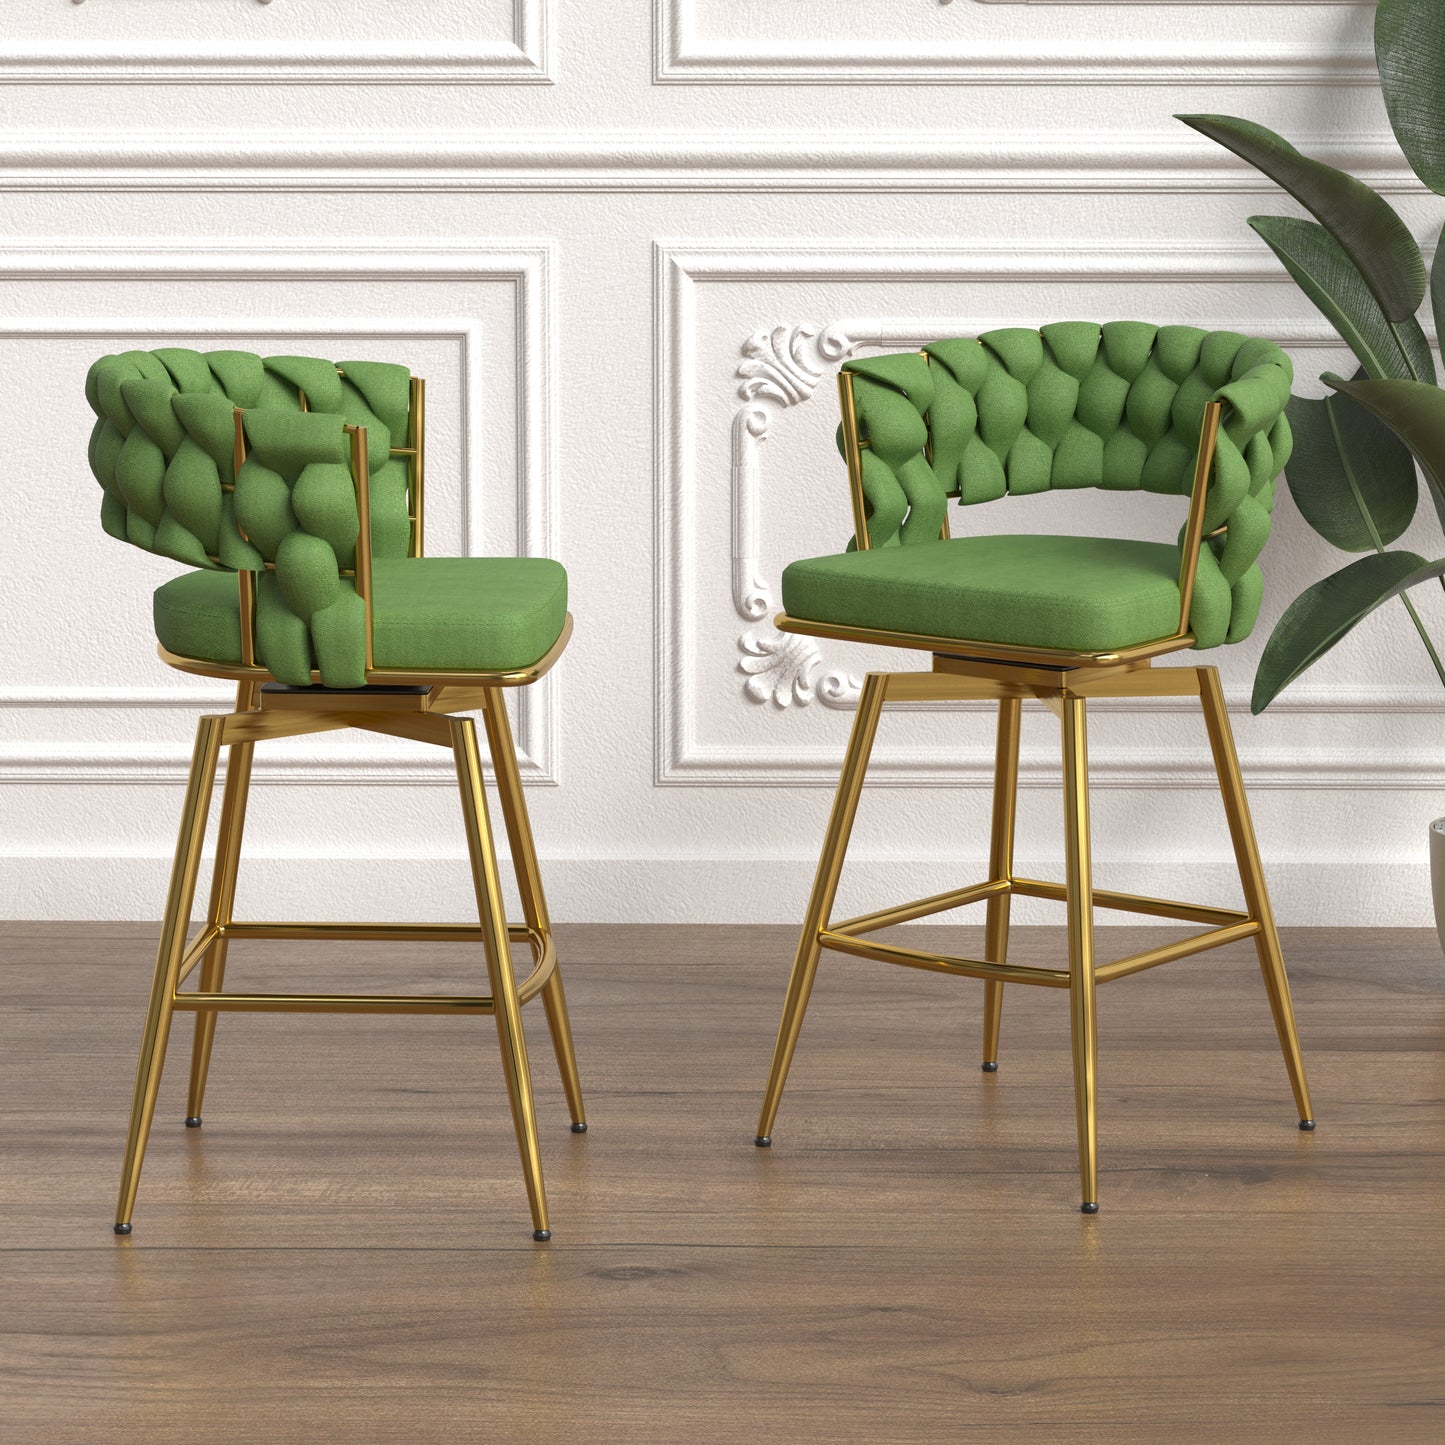 Bar Chair Linen Woven Bar Stool Set of 2,Golden legs Barstools No Adjustable Kitchen Island Chairs,360 Swivel Bar Stools Upholstered Bar Chair Counter Stool Arm Chairs with Back Footrest, (Green)